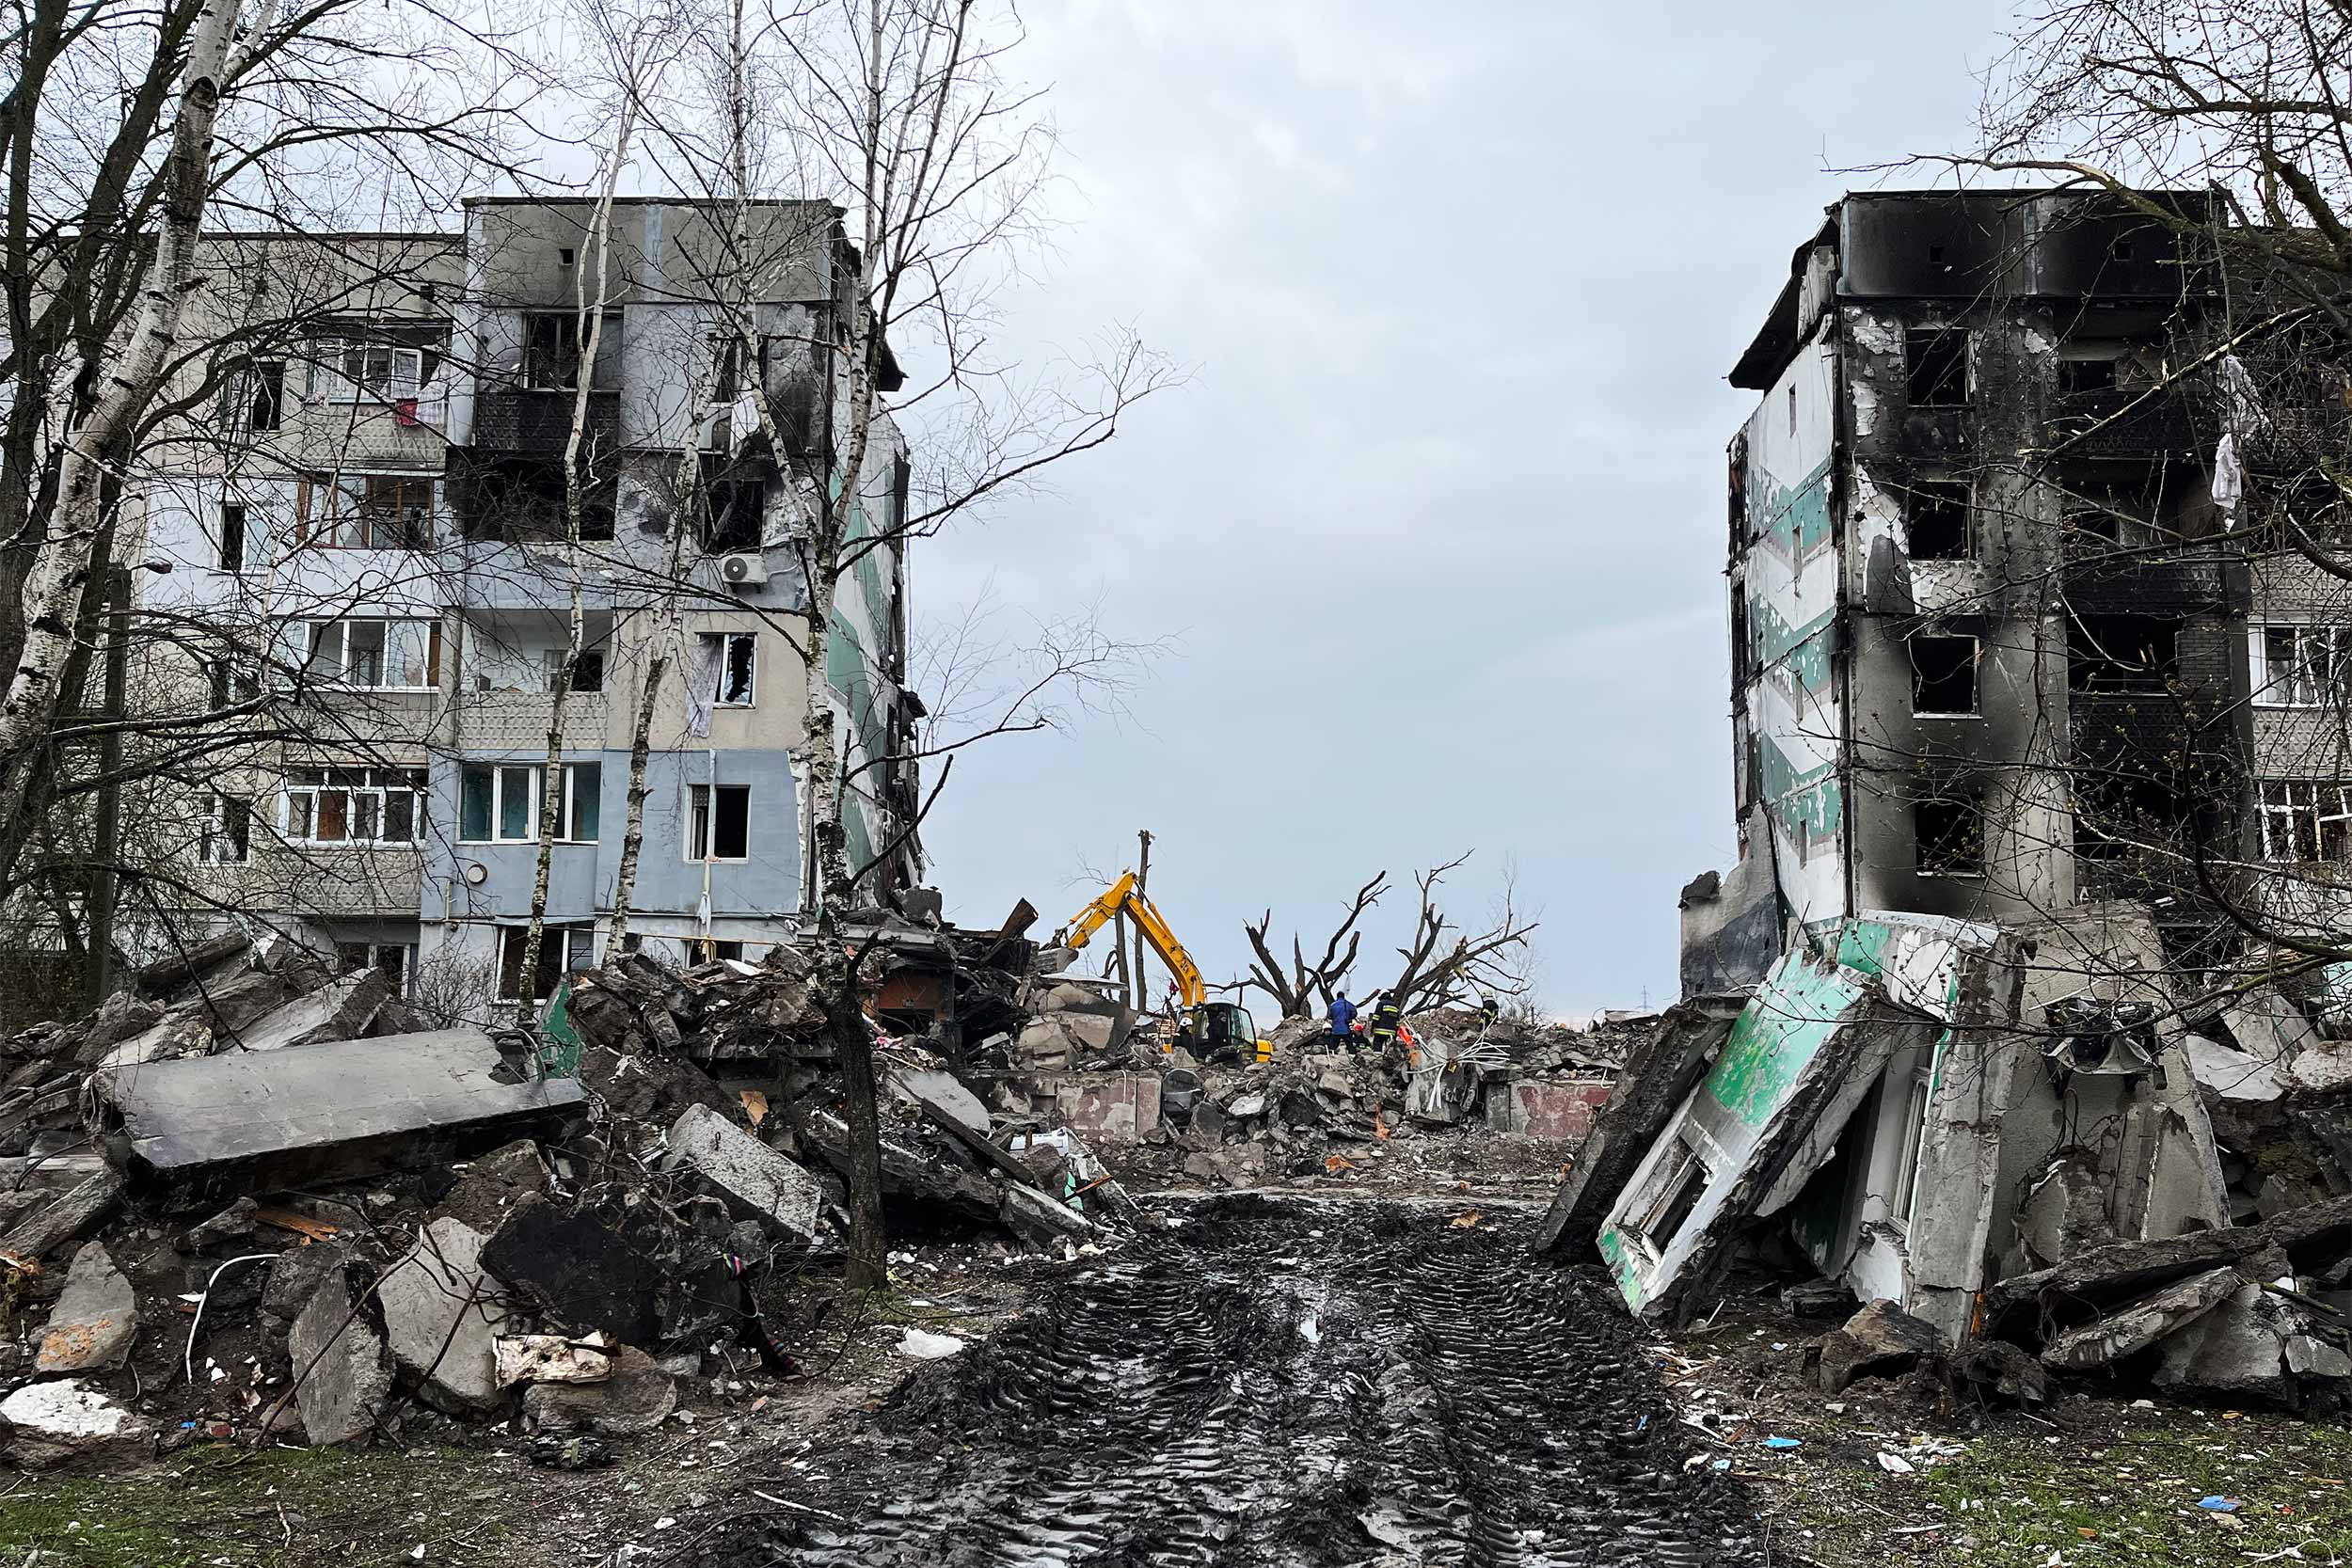 The collapsed building in Borodyanka where the Smishchuk family died, when it was hit by a Russian shell, March 1. Vitaliy, Tetiana and Eva Smishchuk were sheltering in the basement. © IWPR